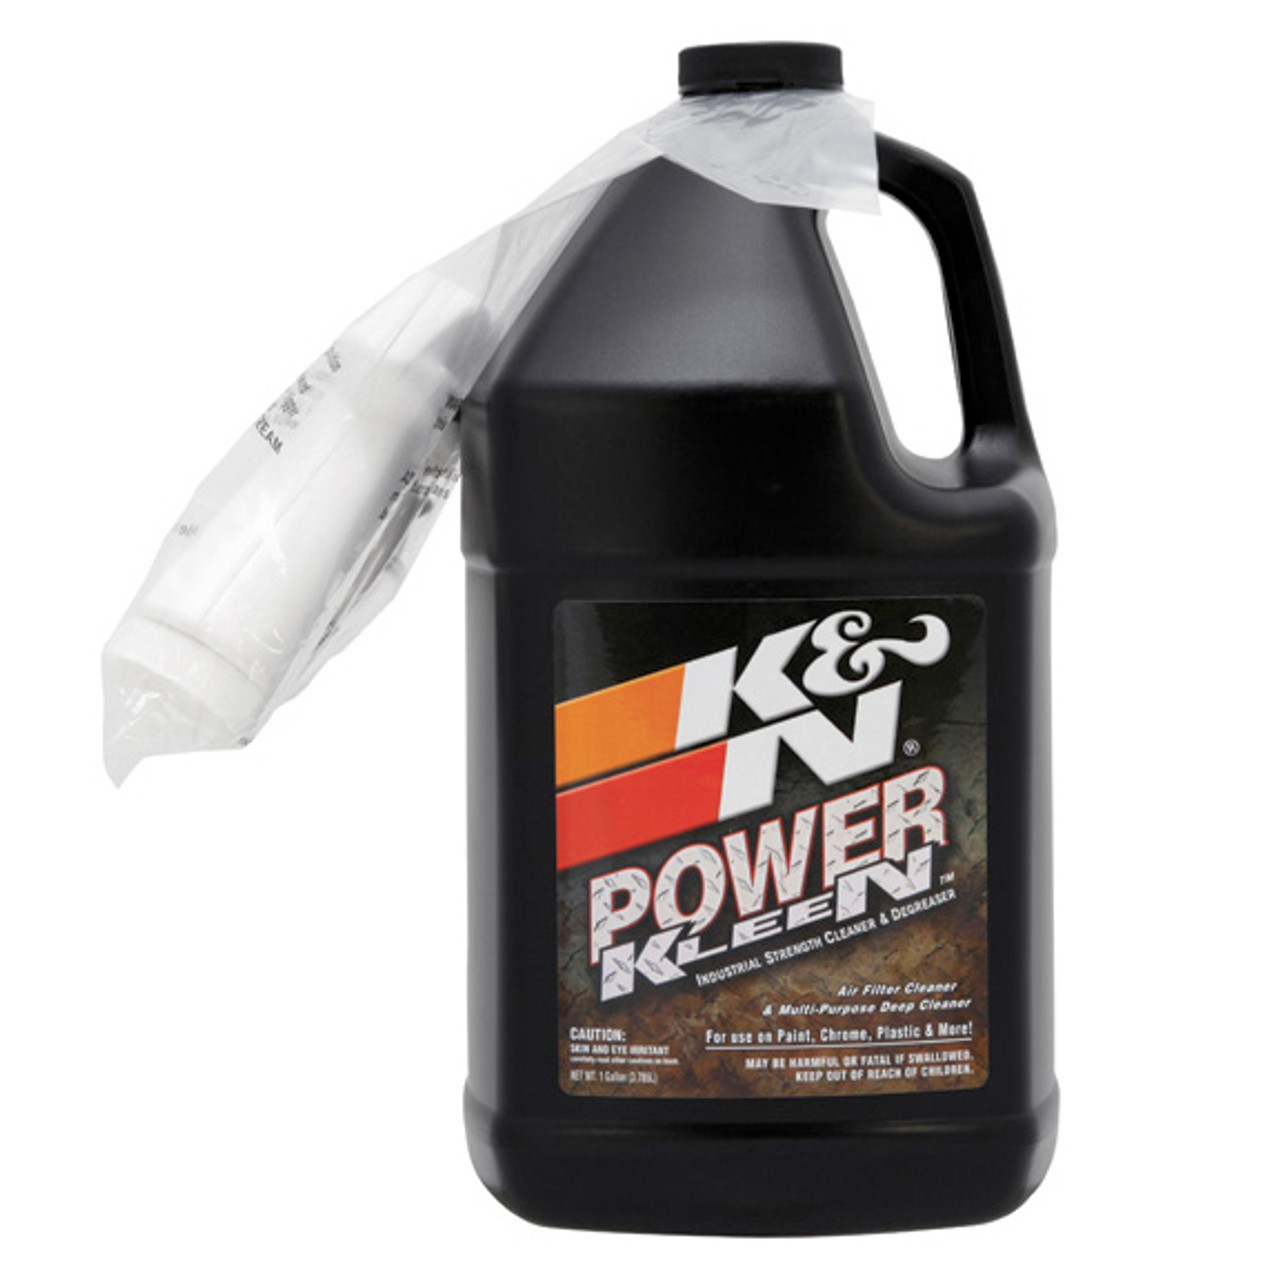 Air Filter Cleaner and Oil for K&N Performance Air Filters